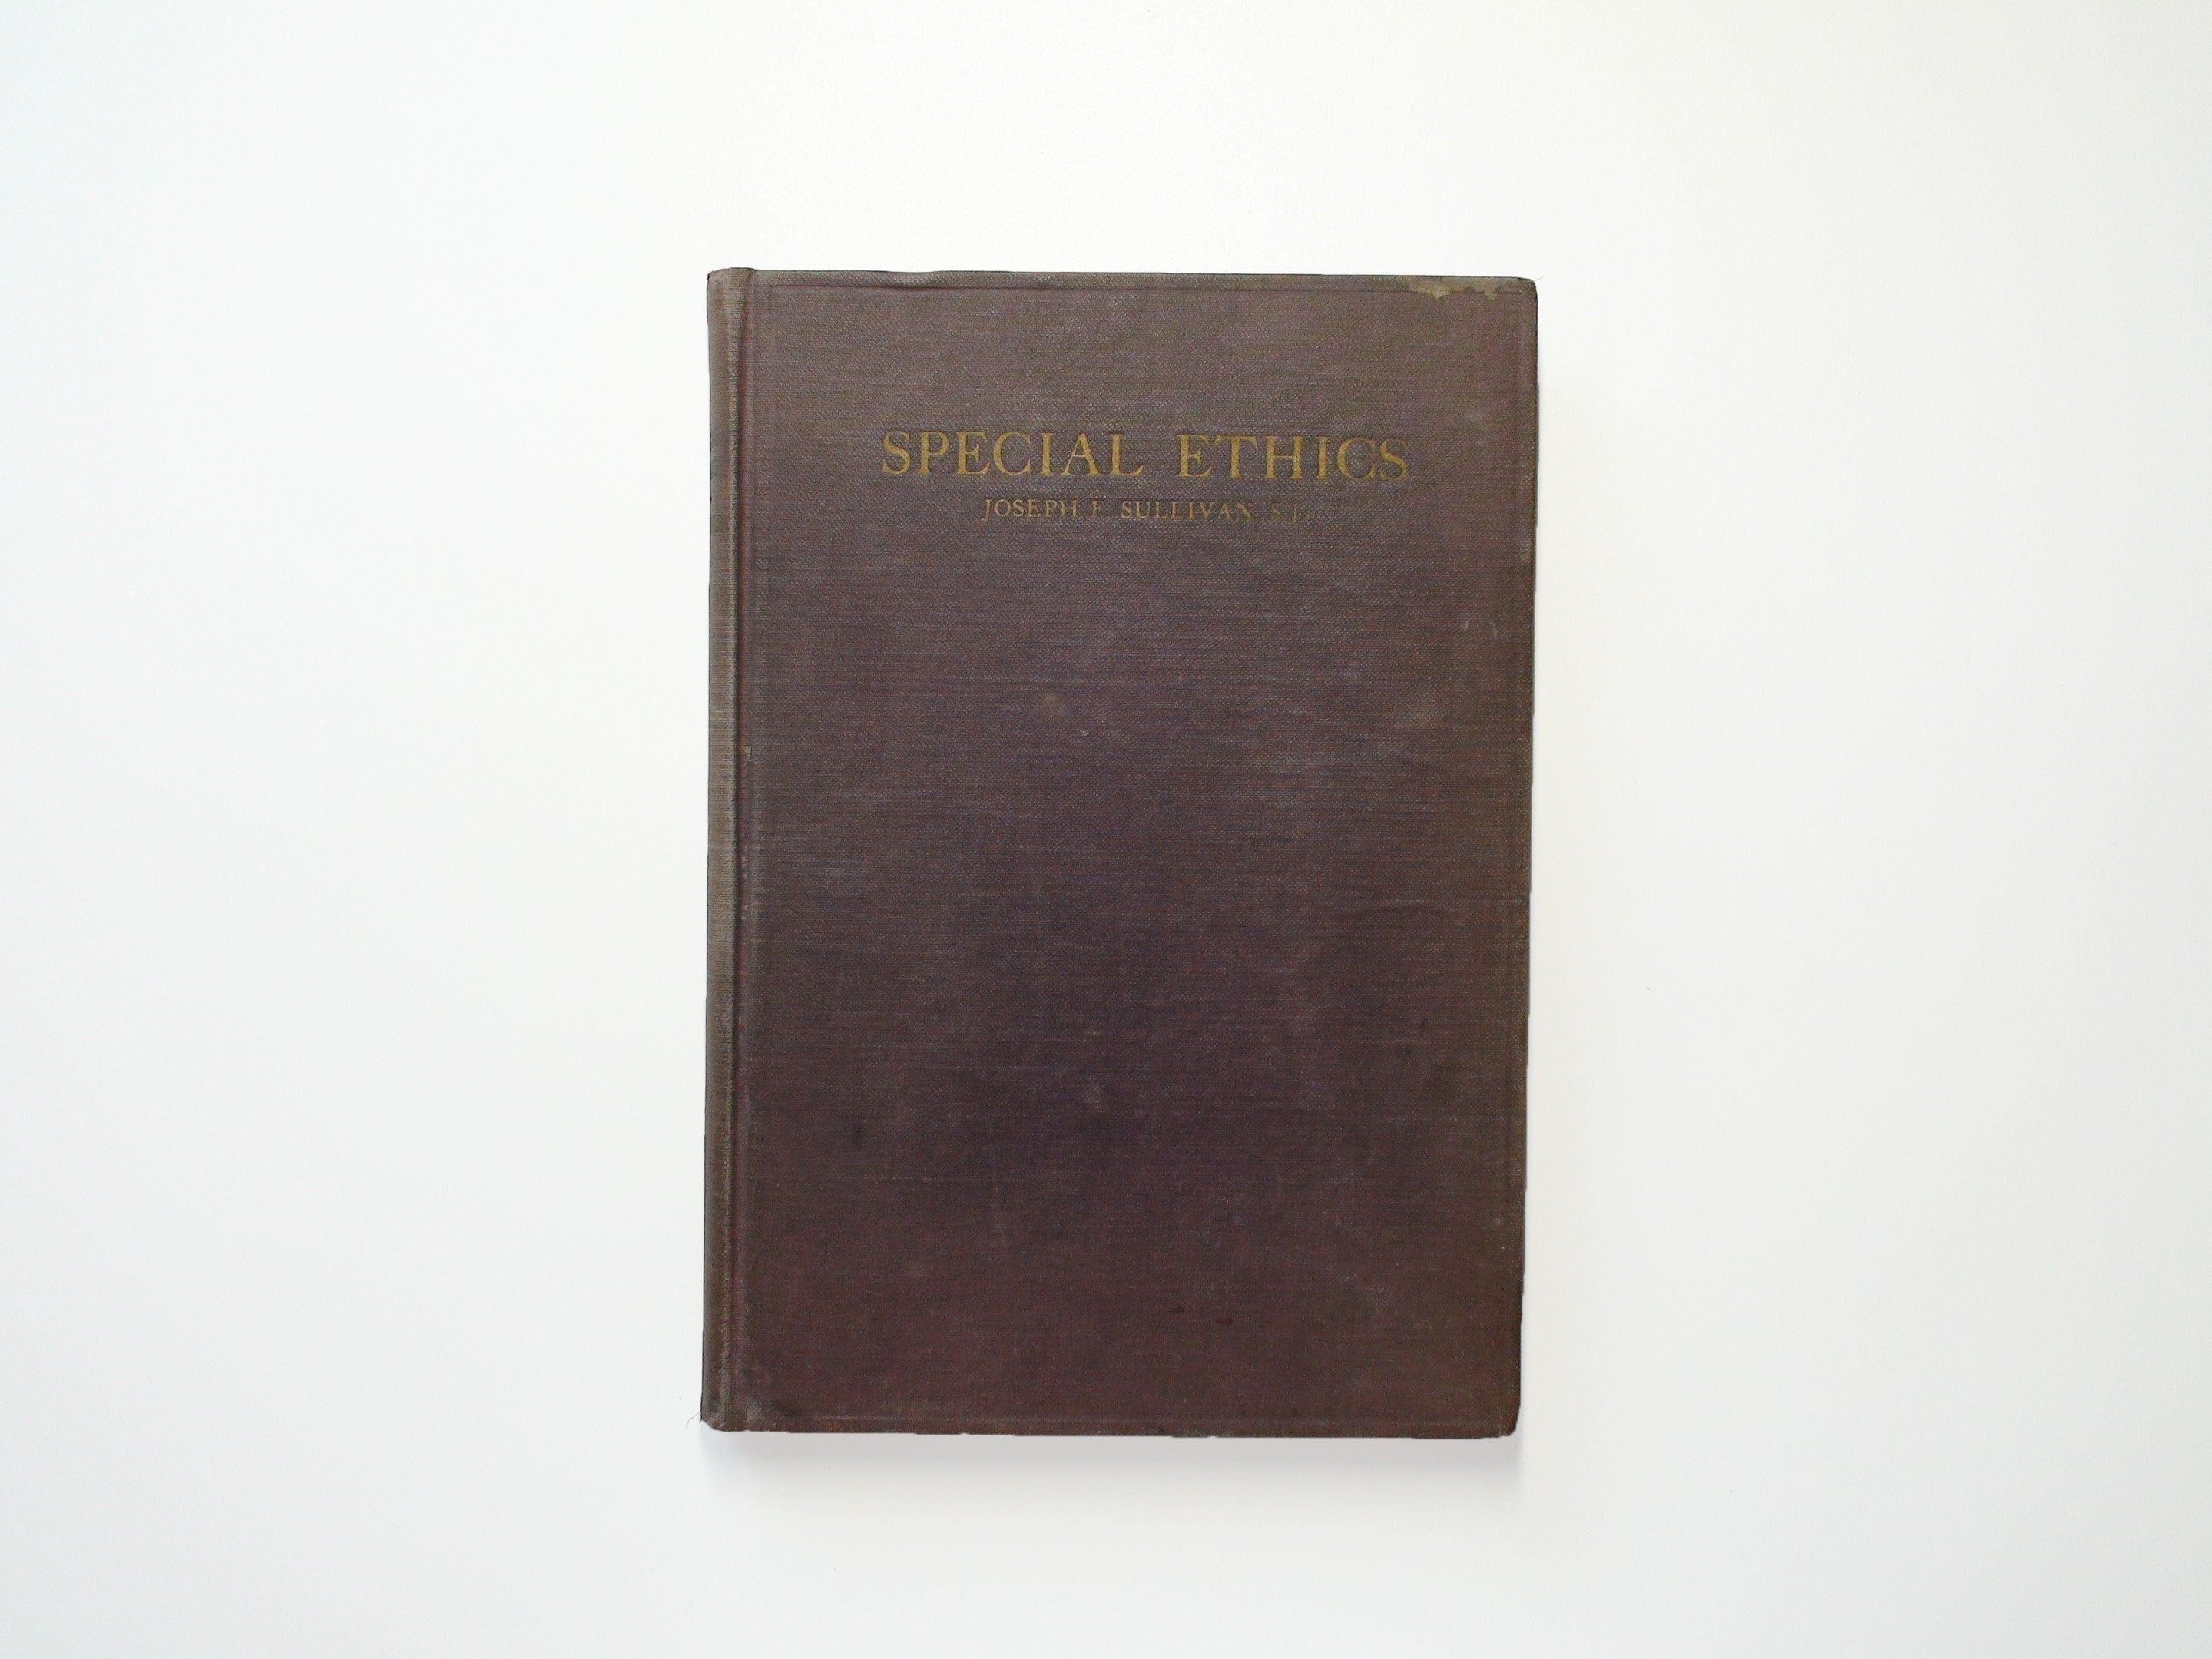 Special Ethics, a Digest of Ethics By Rev. Joseph F. Sullivan, 3rd Ed, 1931